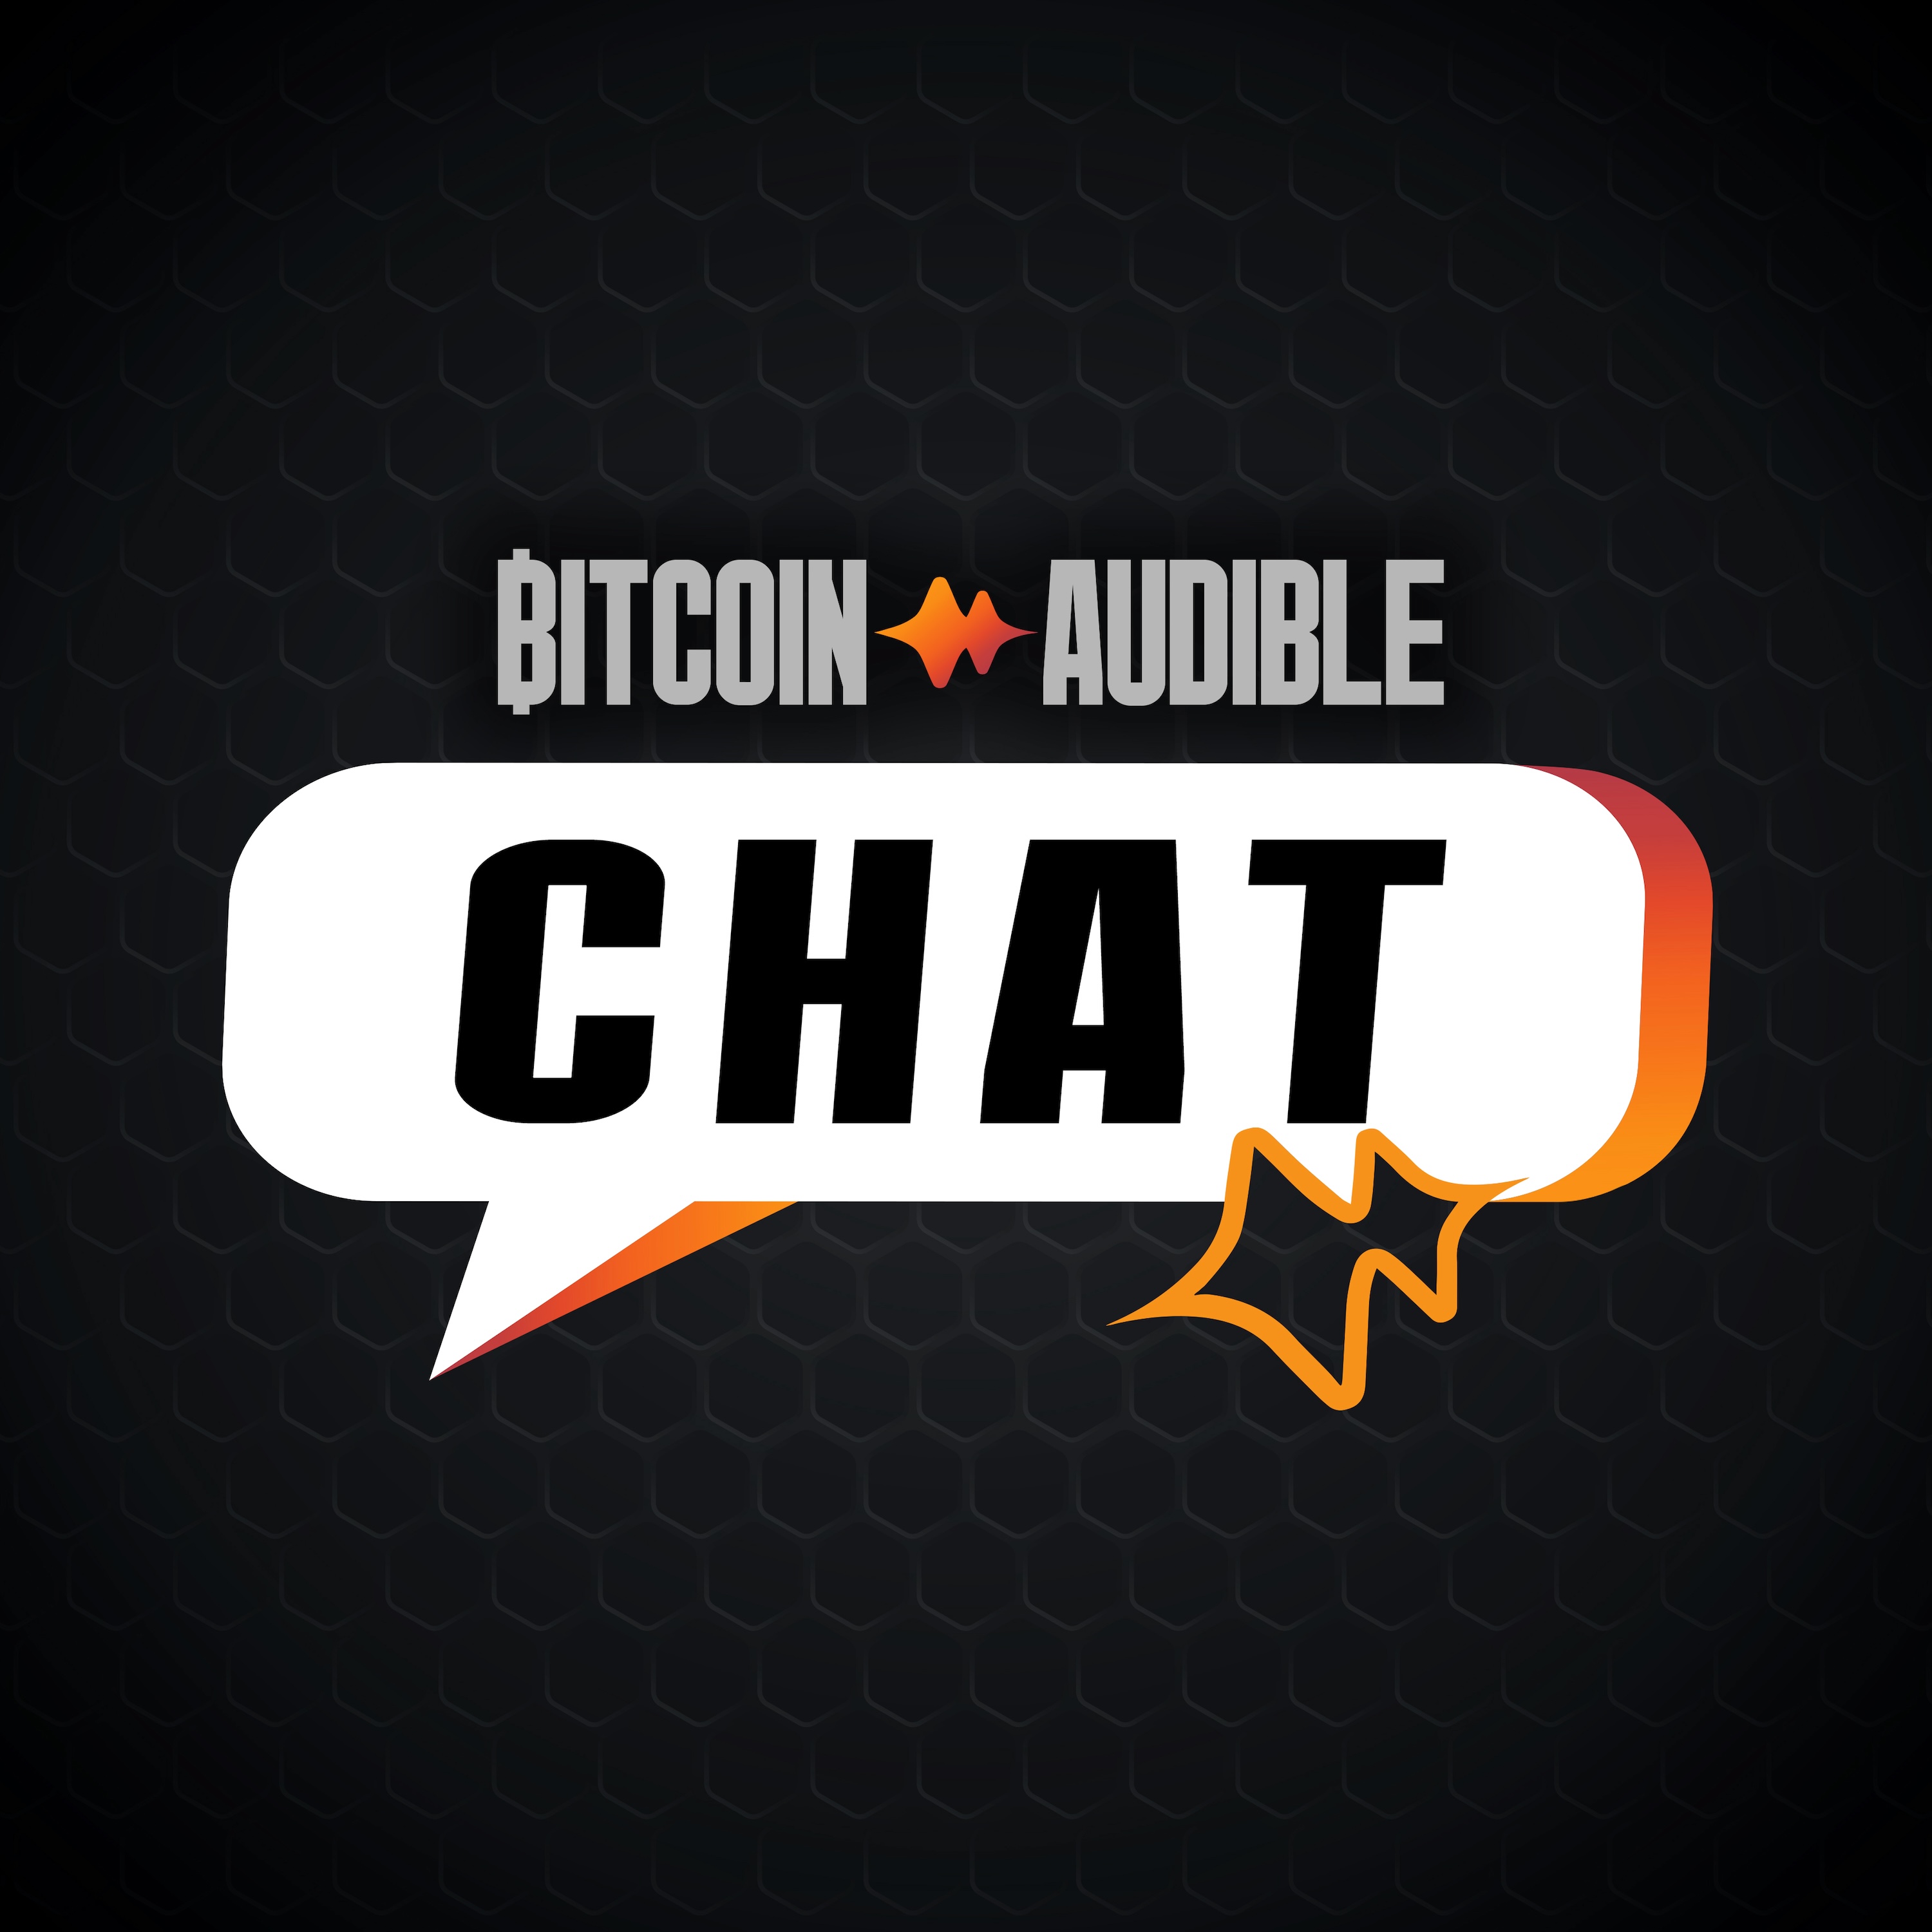 CryptoChat_005 - Brady Swenson on Being an Informed Bitcoin Citizen